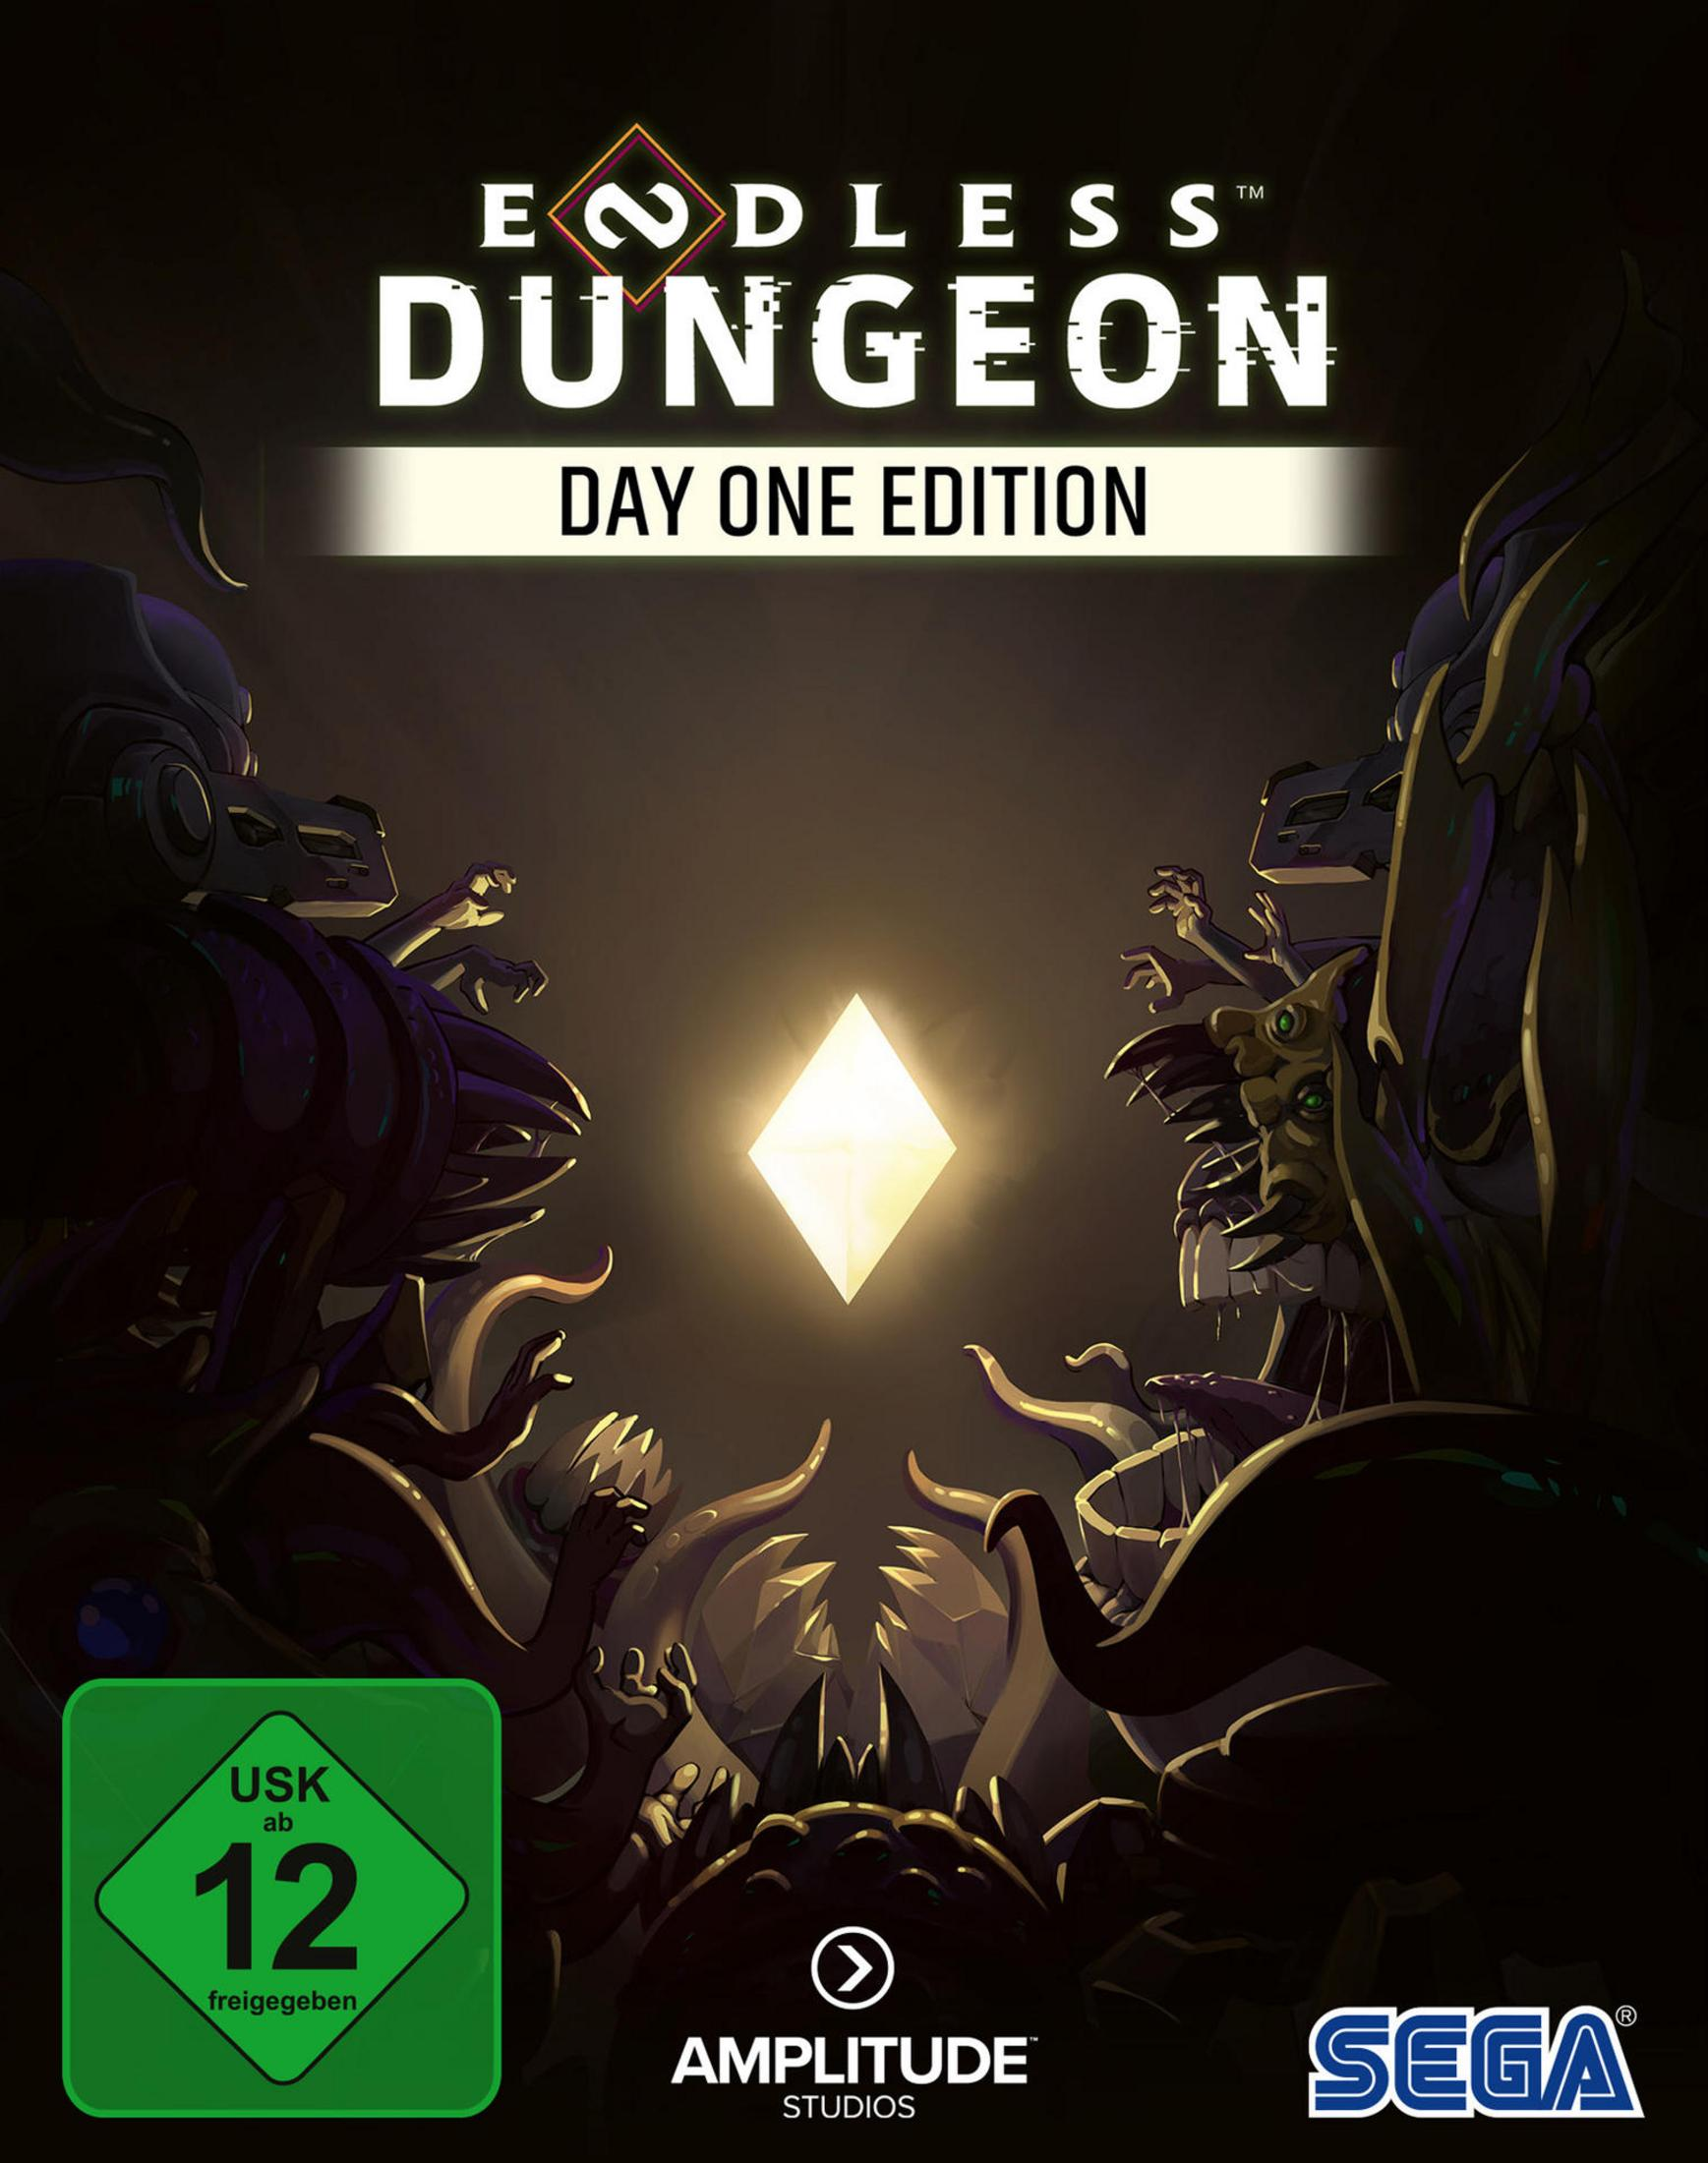 ENDLESS DUNGEON DAY ONE [PC] EDITION 